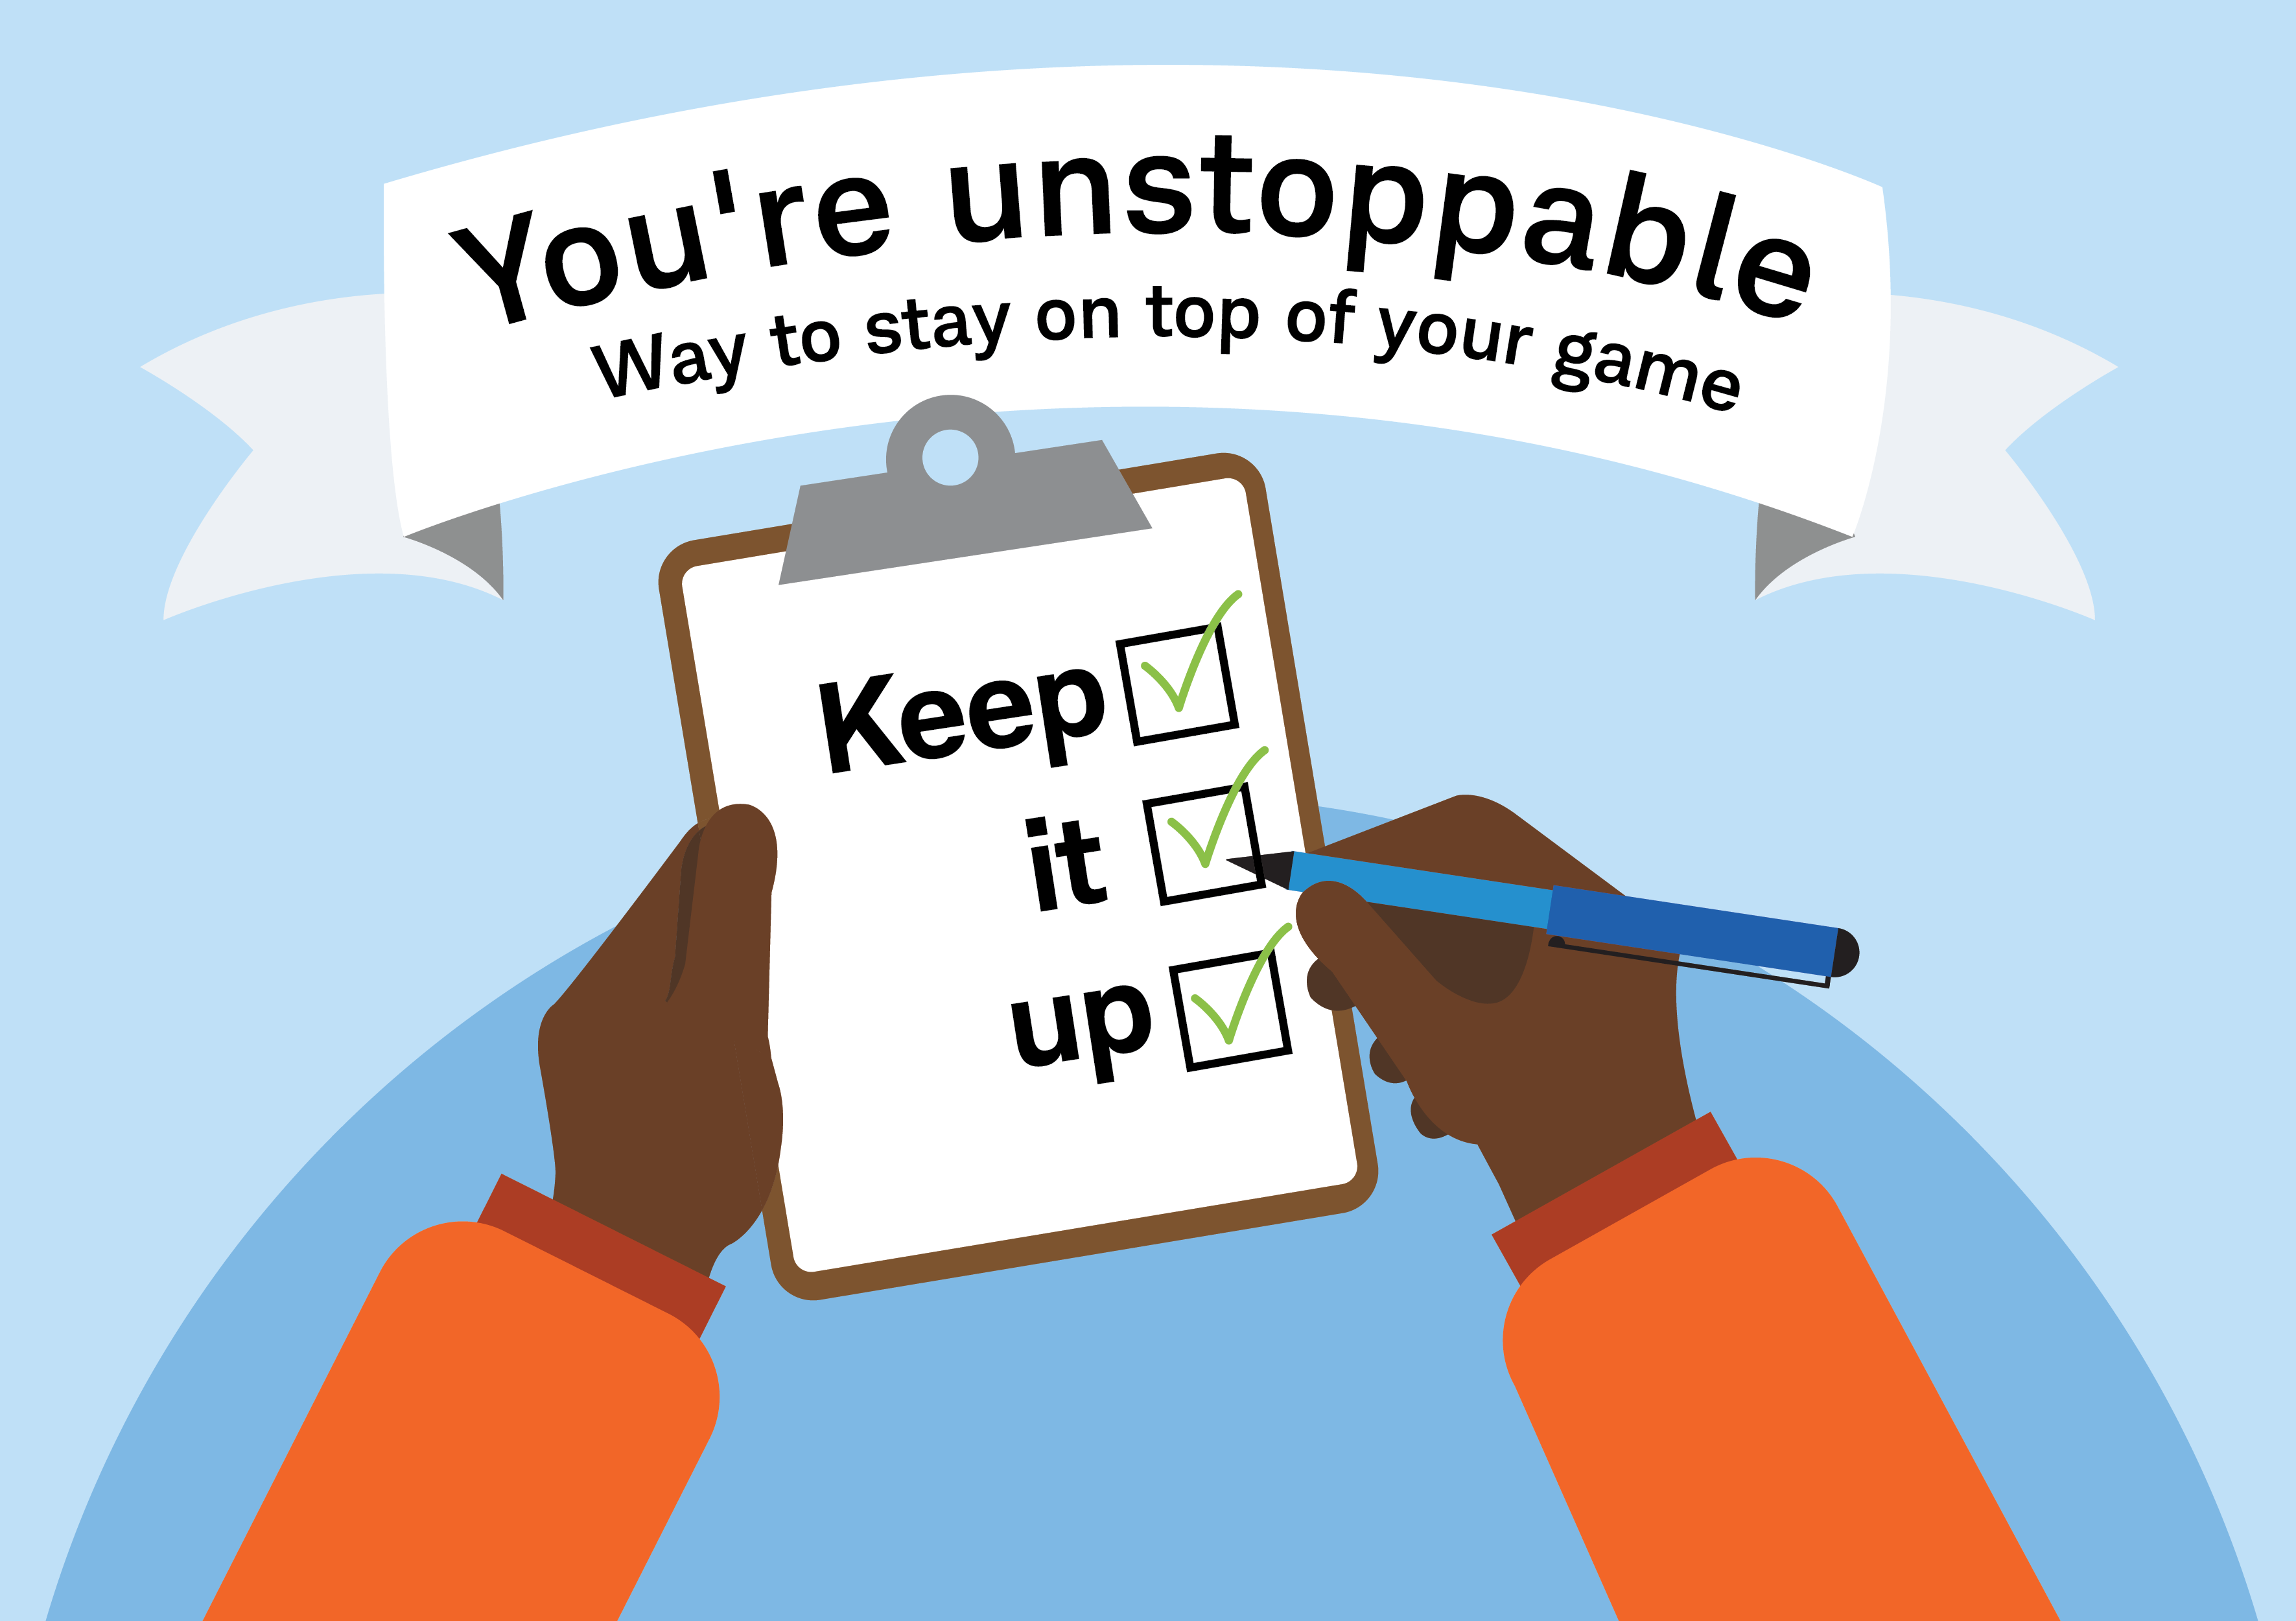 You're unstoppable. Way to stay on top of your game. Keep it up.